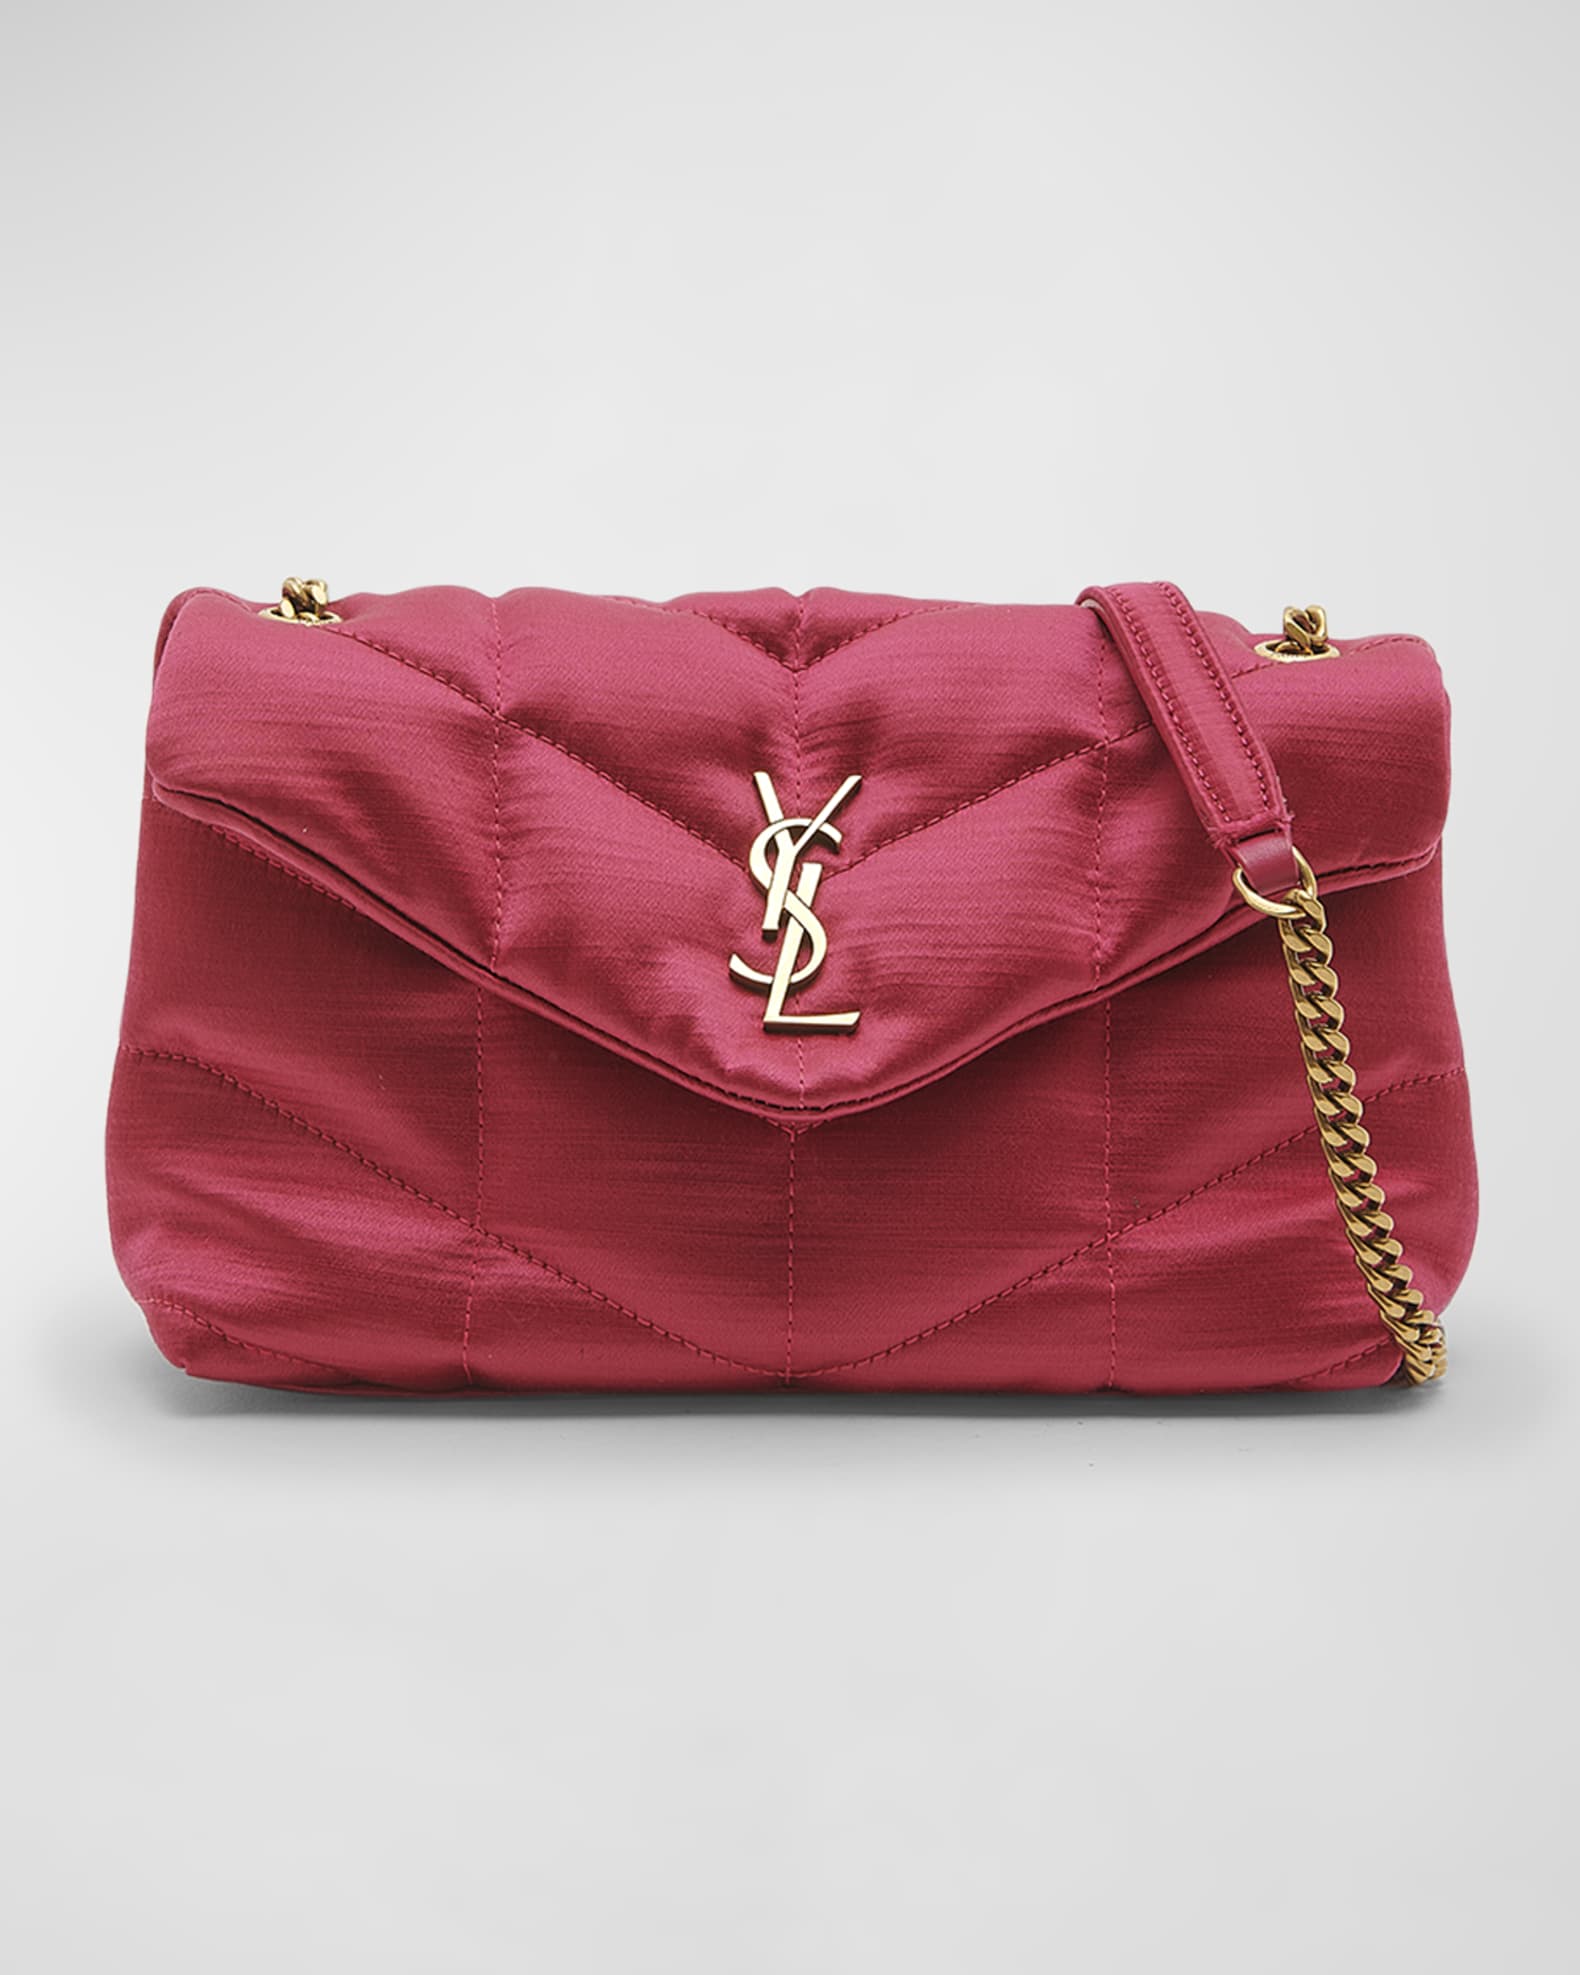 YSL Toy LouLou Bag Review - Is Toy LouLou Bag Worth It? One Year Handbag  Review & YSL Price Increase 